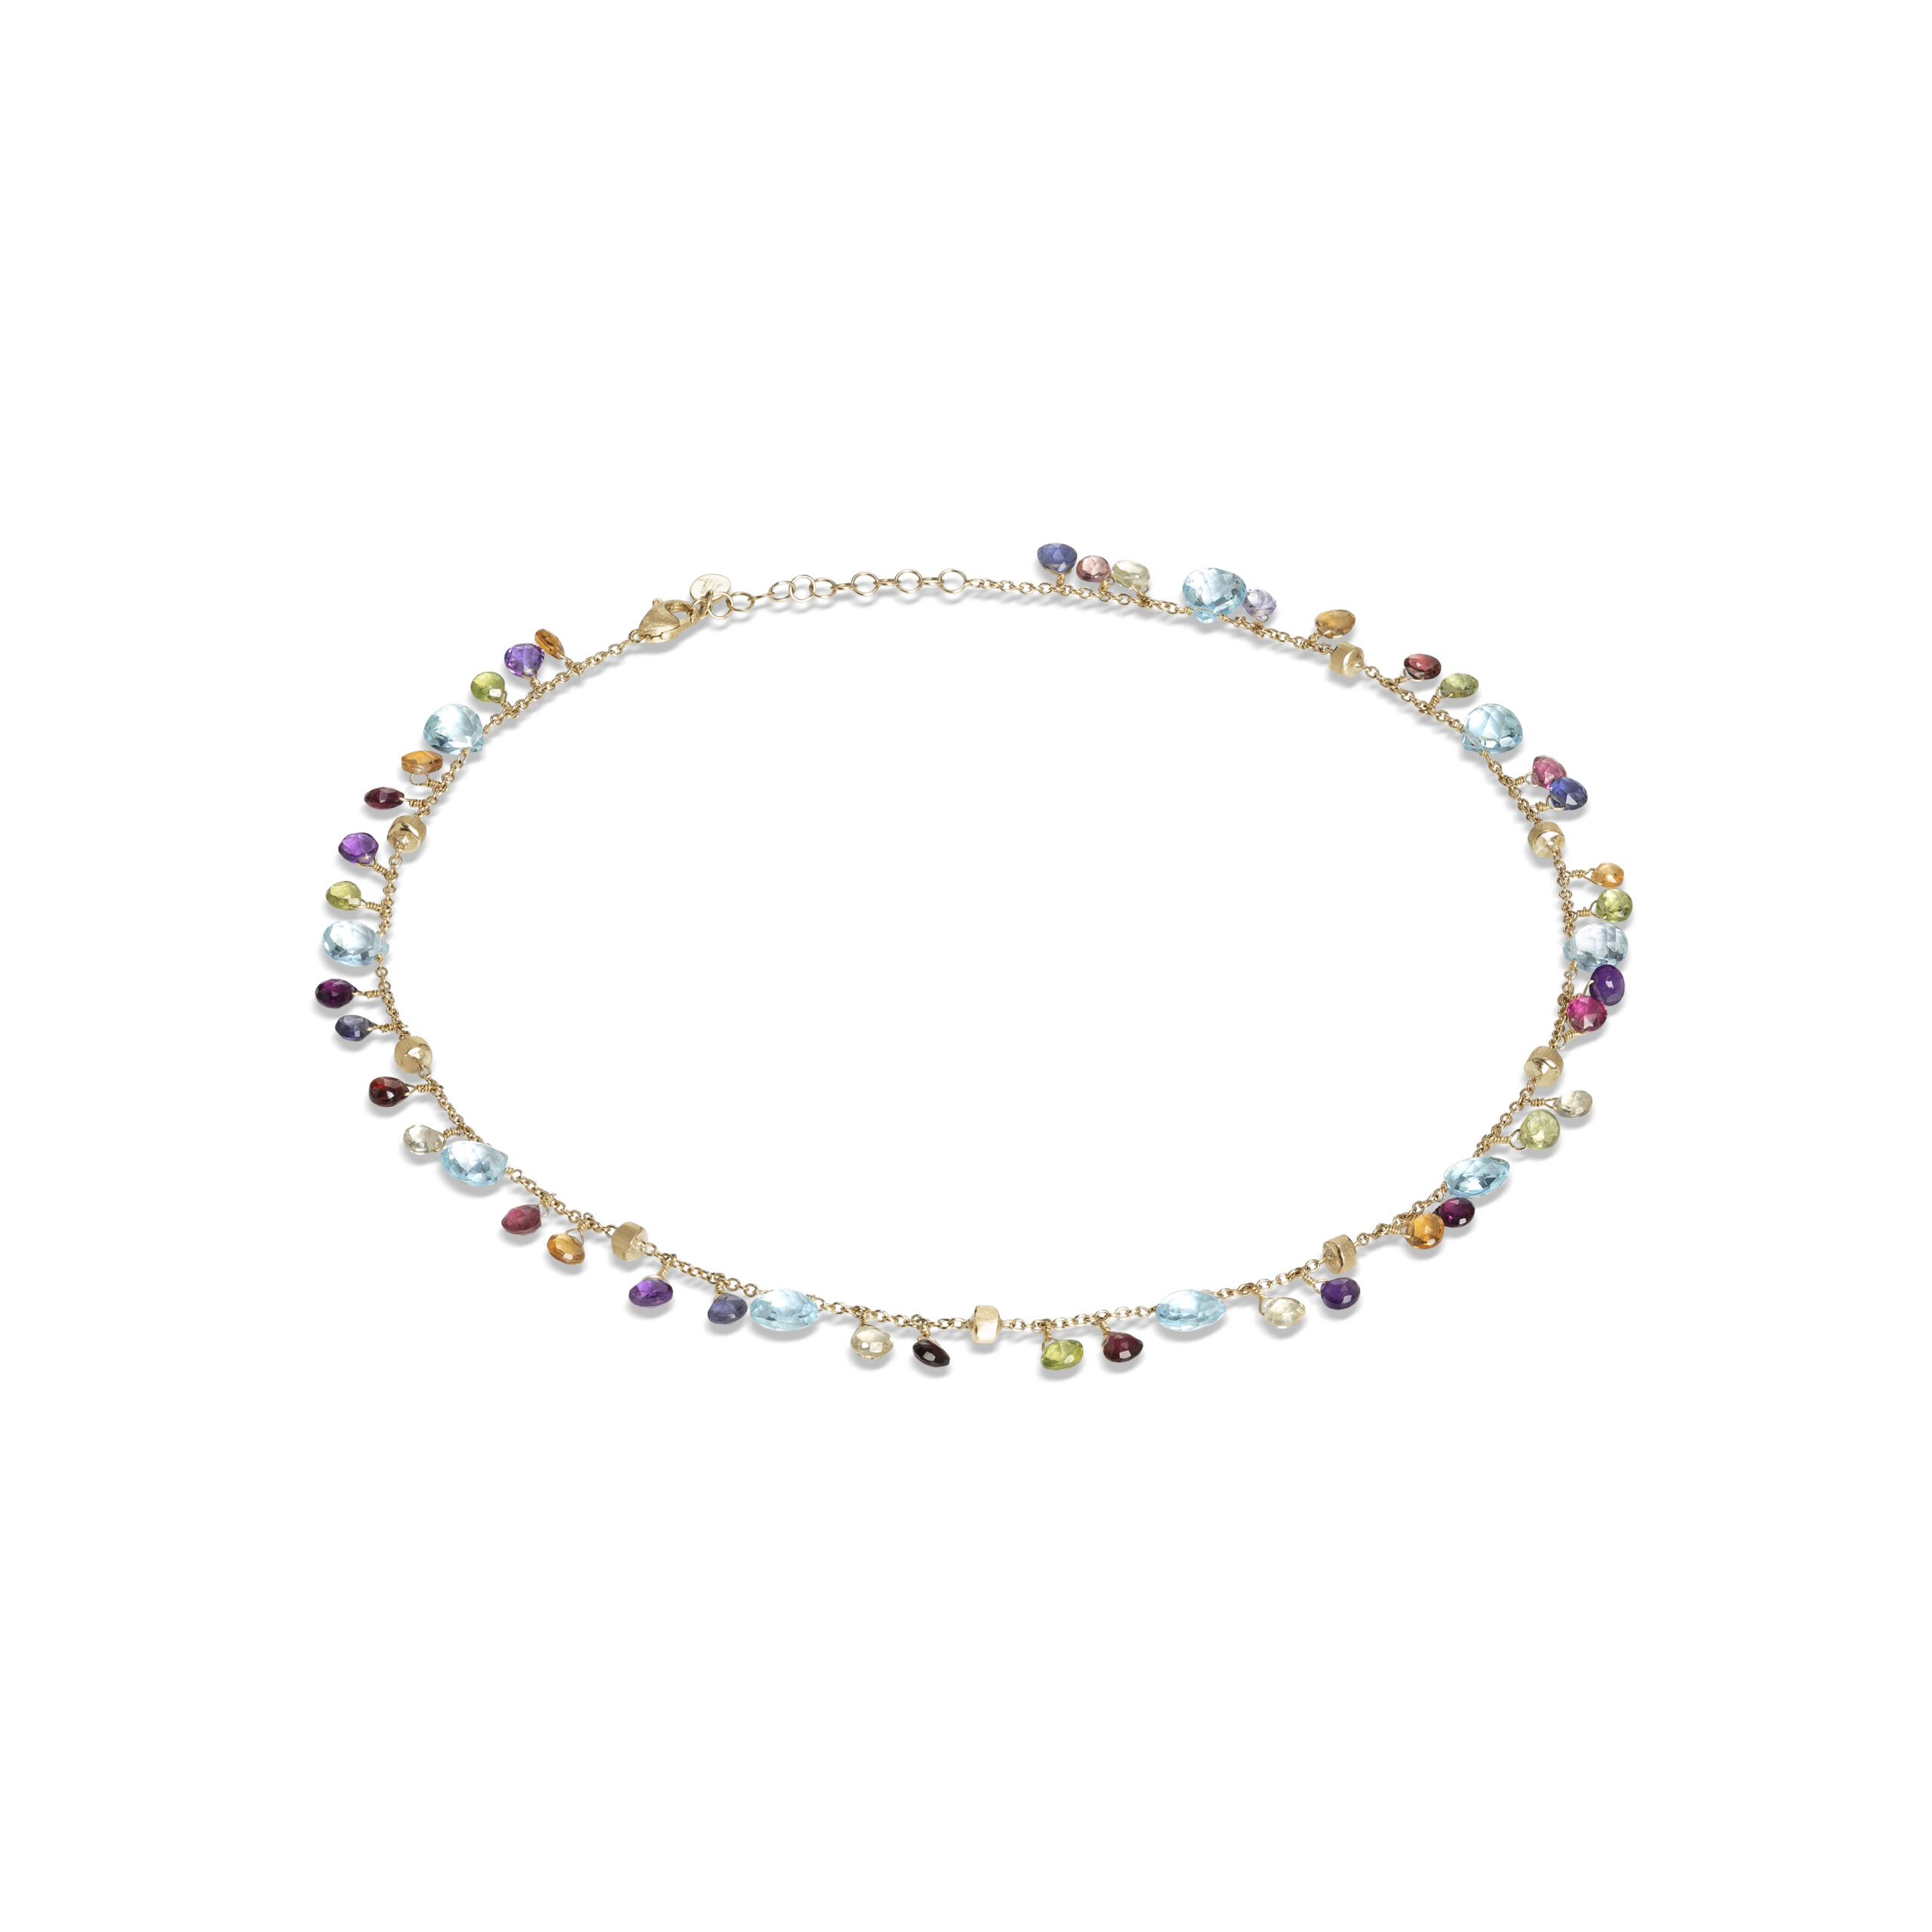 CB2584-E MIX01T Y 02Marco Bicego Paradise Collection 18k Yellow Gold Blue Topaz and Mixed Gemstone Single Strand Necklace